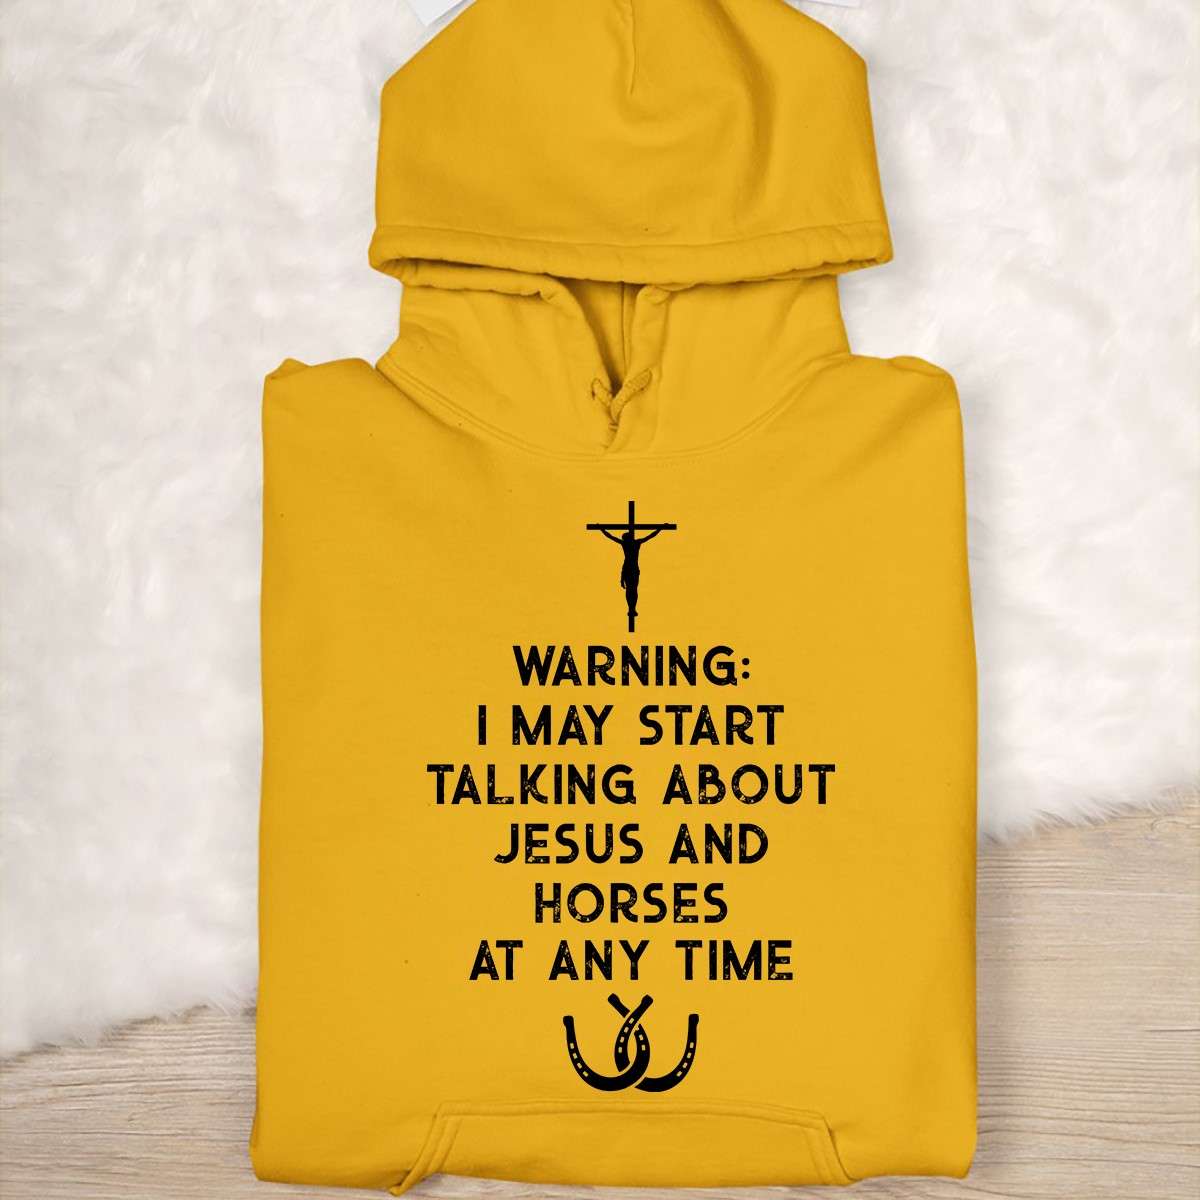 Jesus Horses - Warning i may start talking about jesus and horses at any time